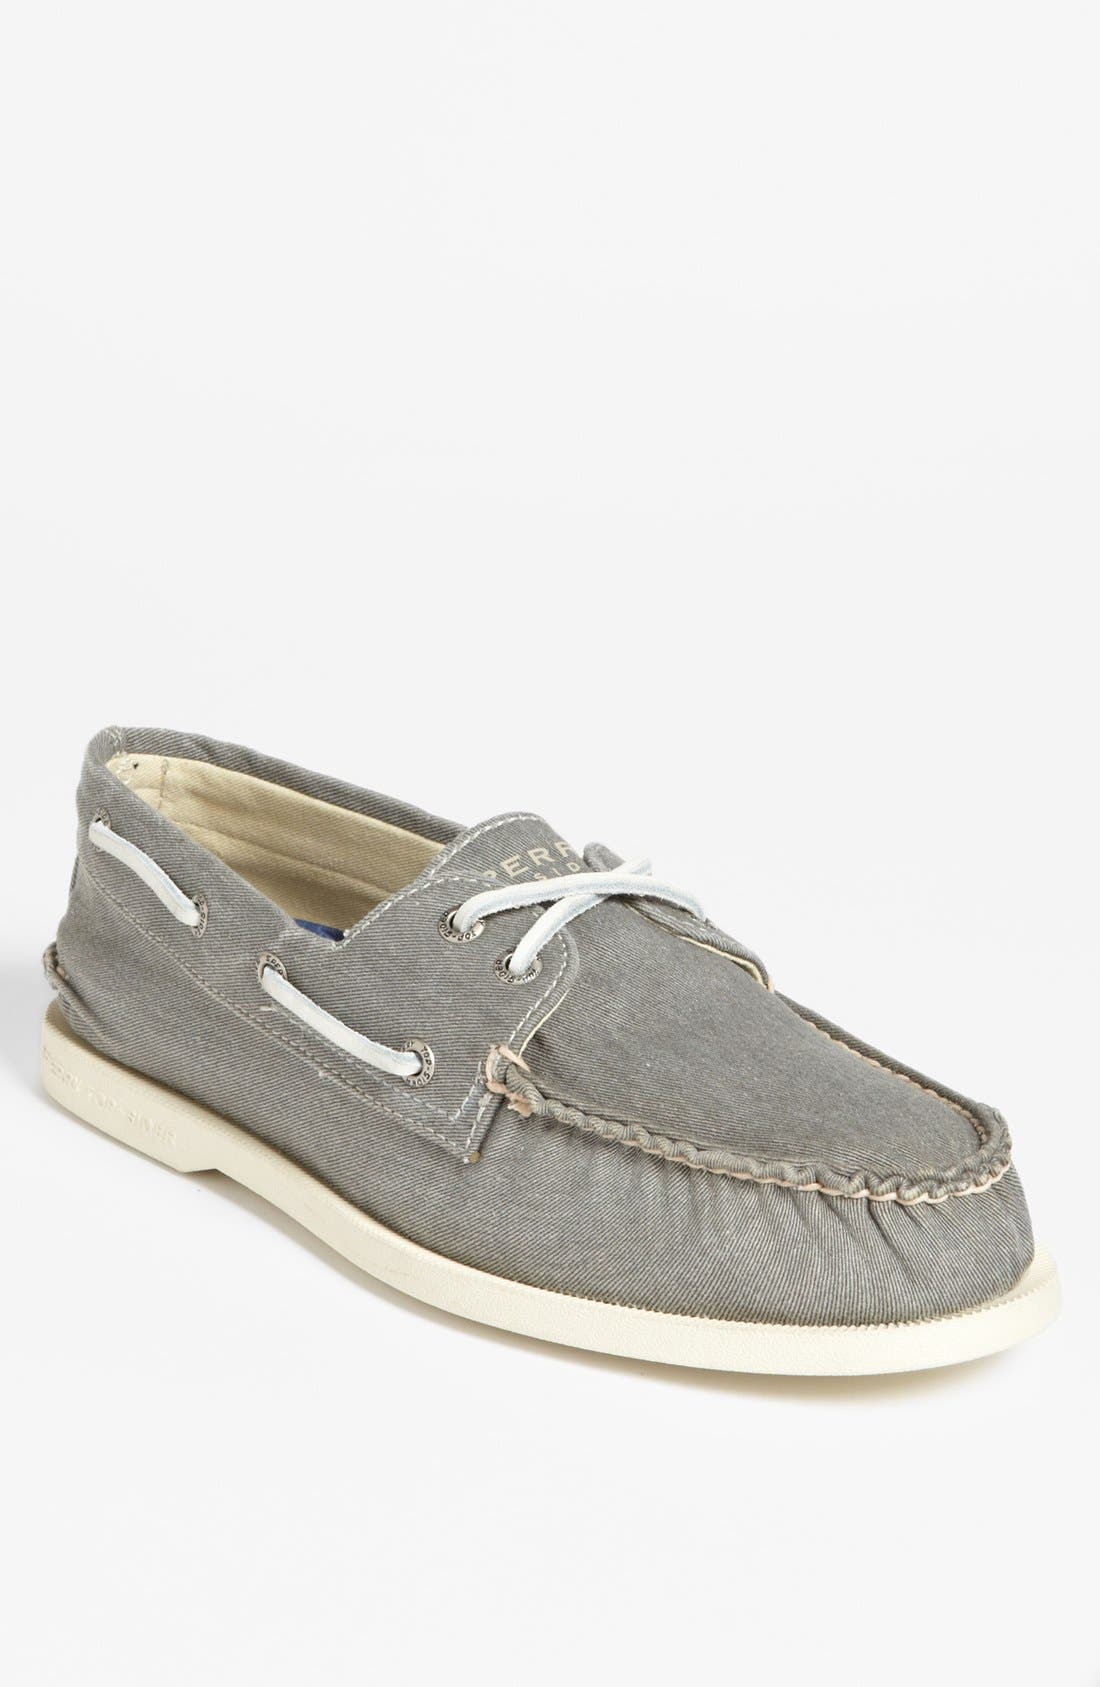 sperry canvas boat shoes